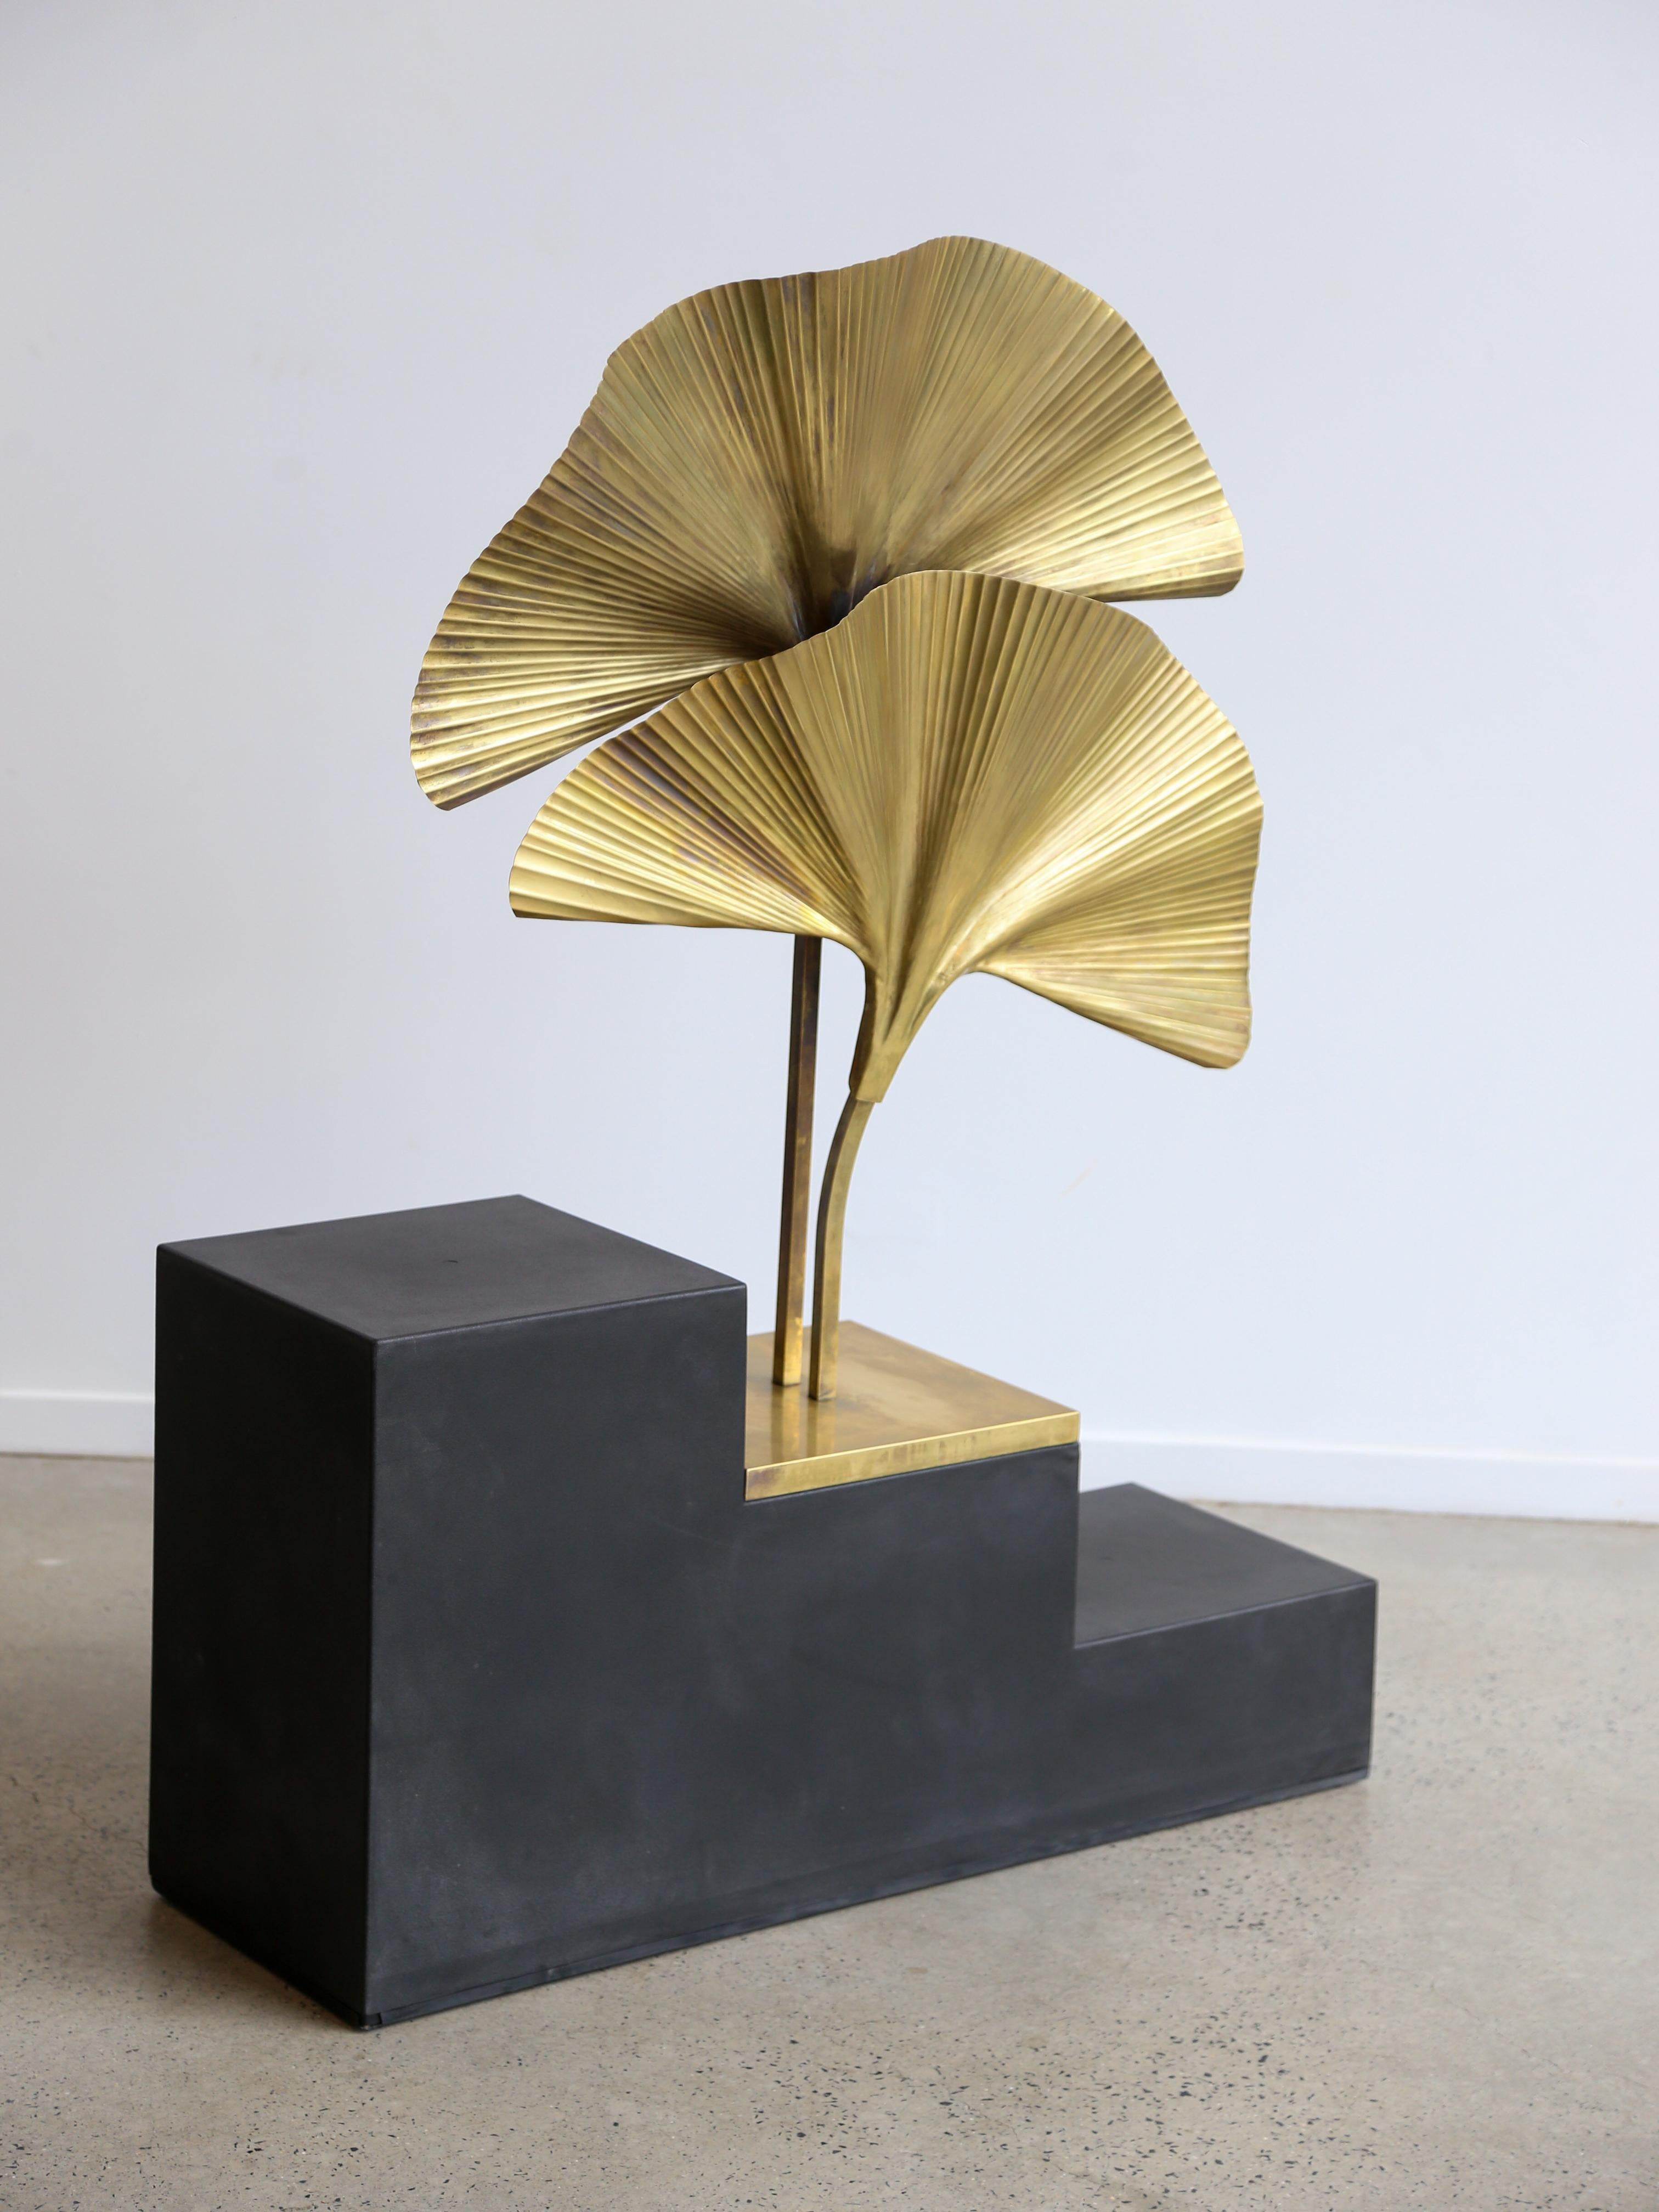 Contemporary design table lamp entirely made of brass with two Ginko leaves and square base.

This combination of brass and botanical elements creates a stylish design and nature-inspired lighting fixture. The Ginkgo Biloba is a tree known for its